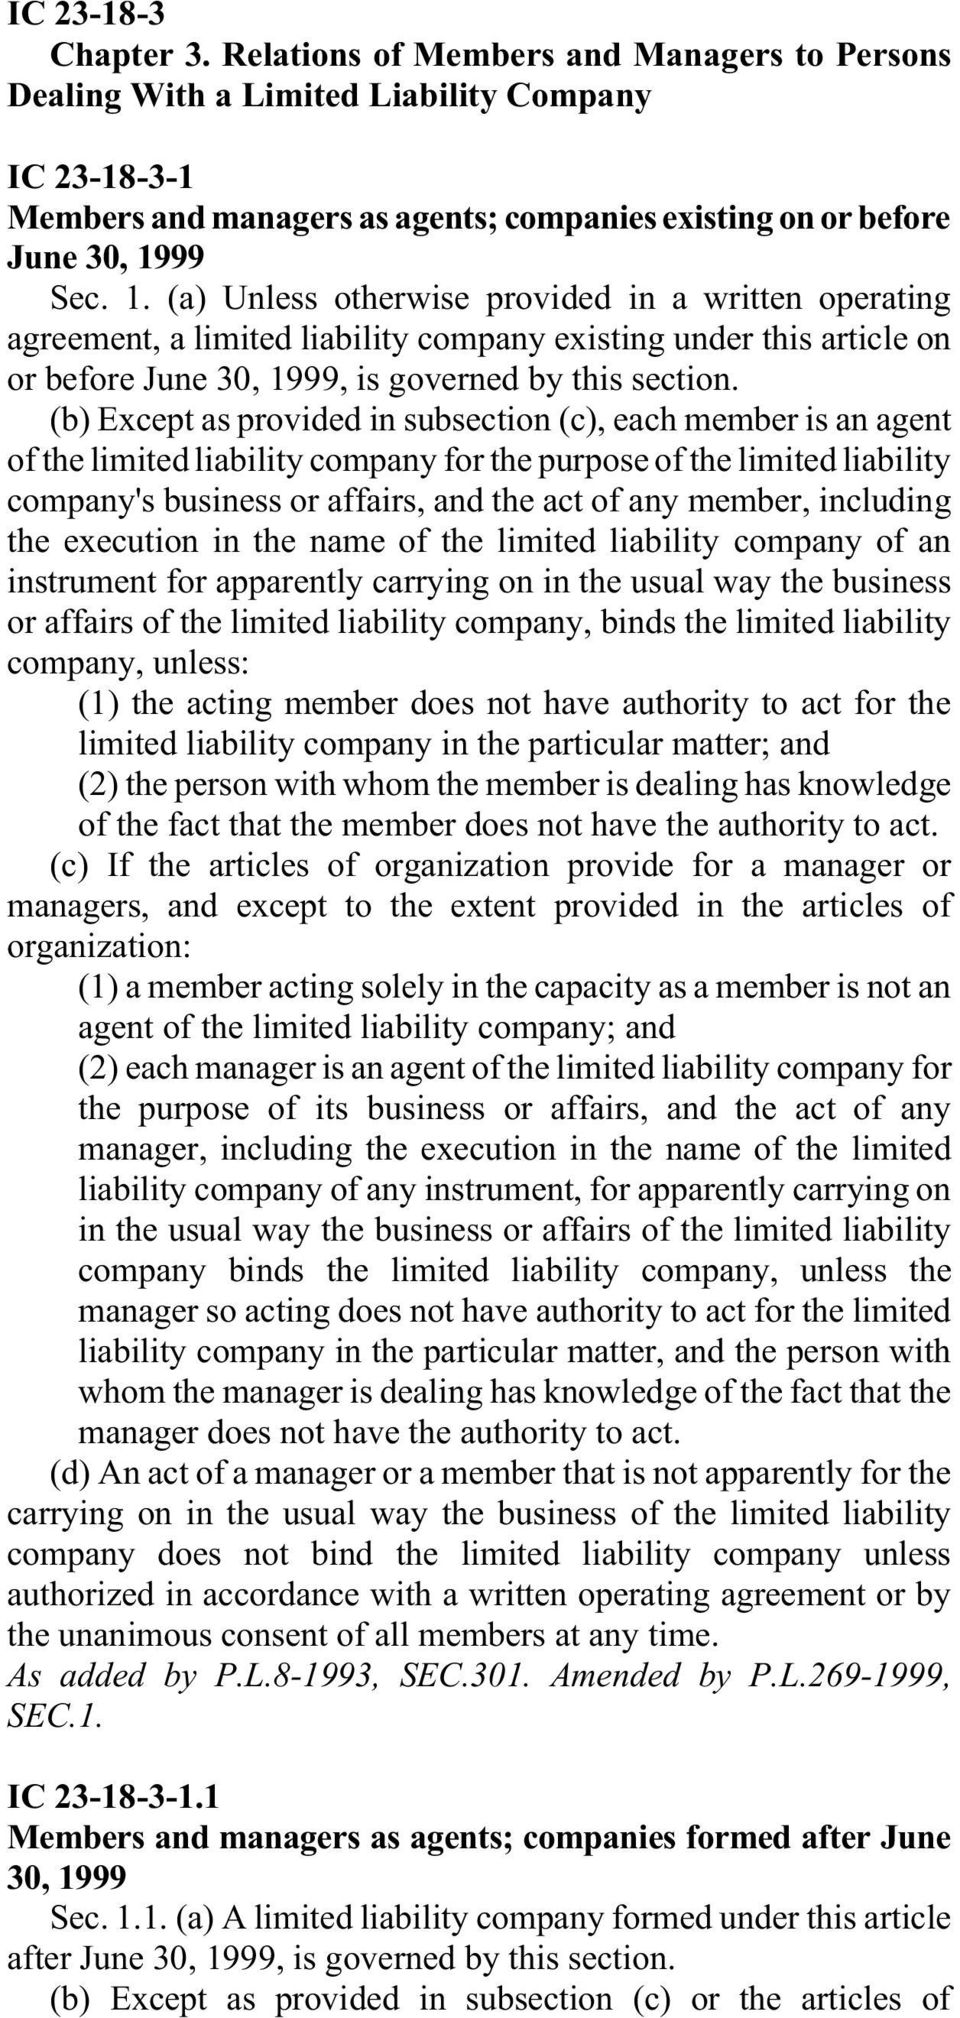 99 Sec. 1. (a) Unless otherwise provided in a written operating agreement, a limited liability company existing under this article on or before June 30, 1999, is governed by this section.